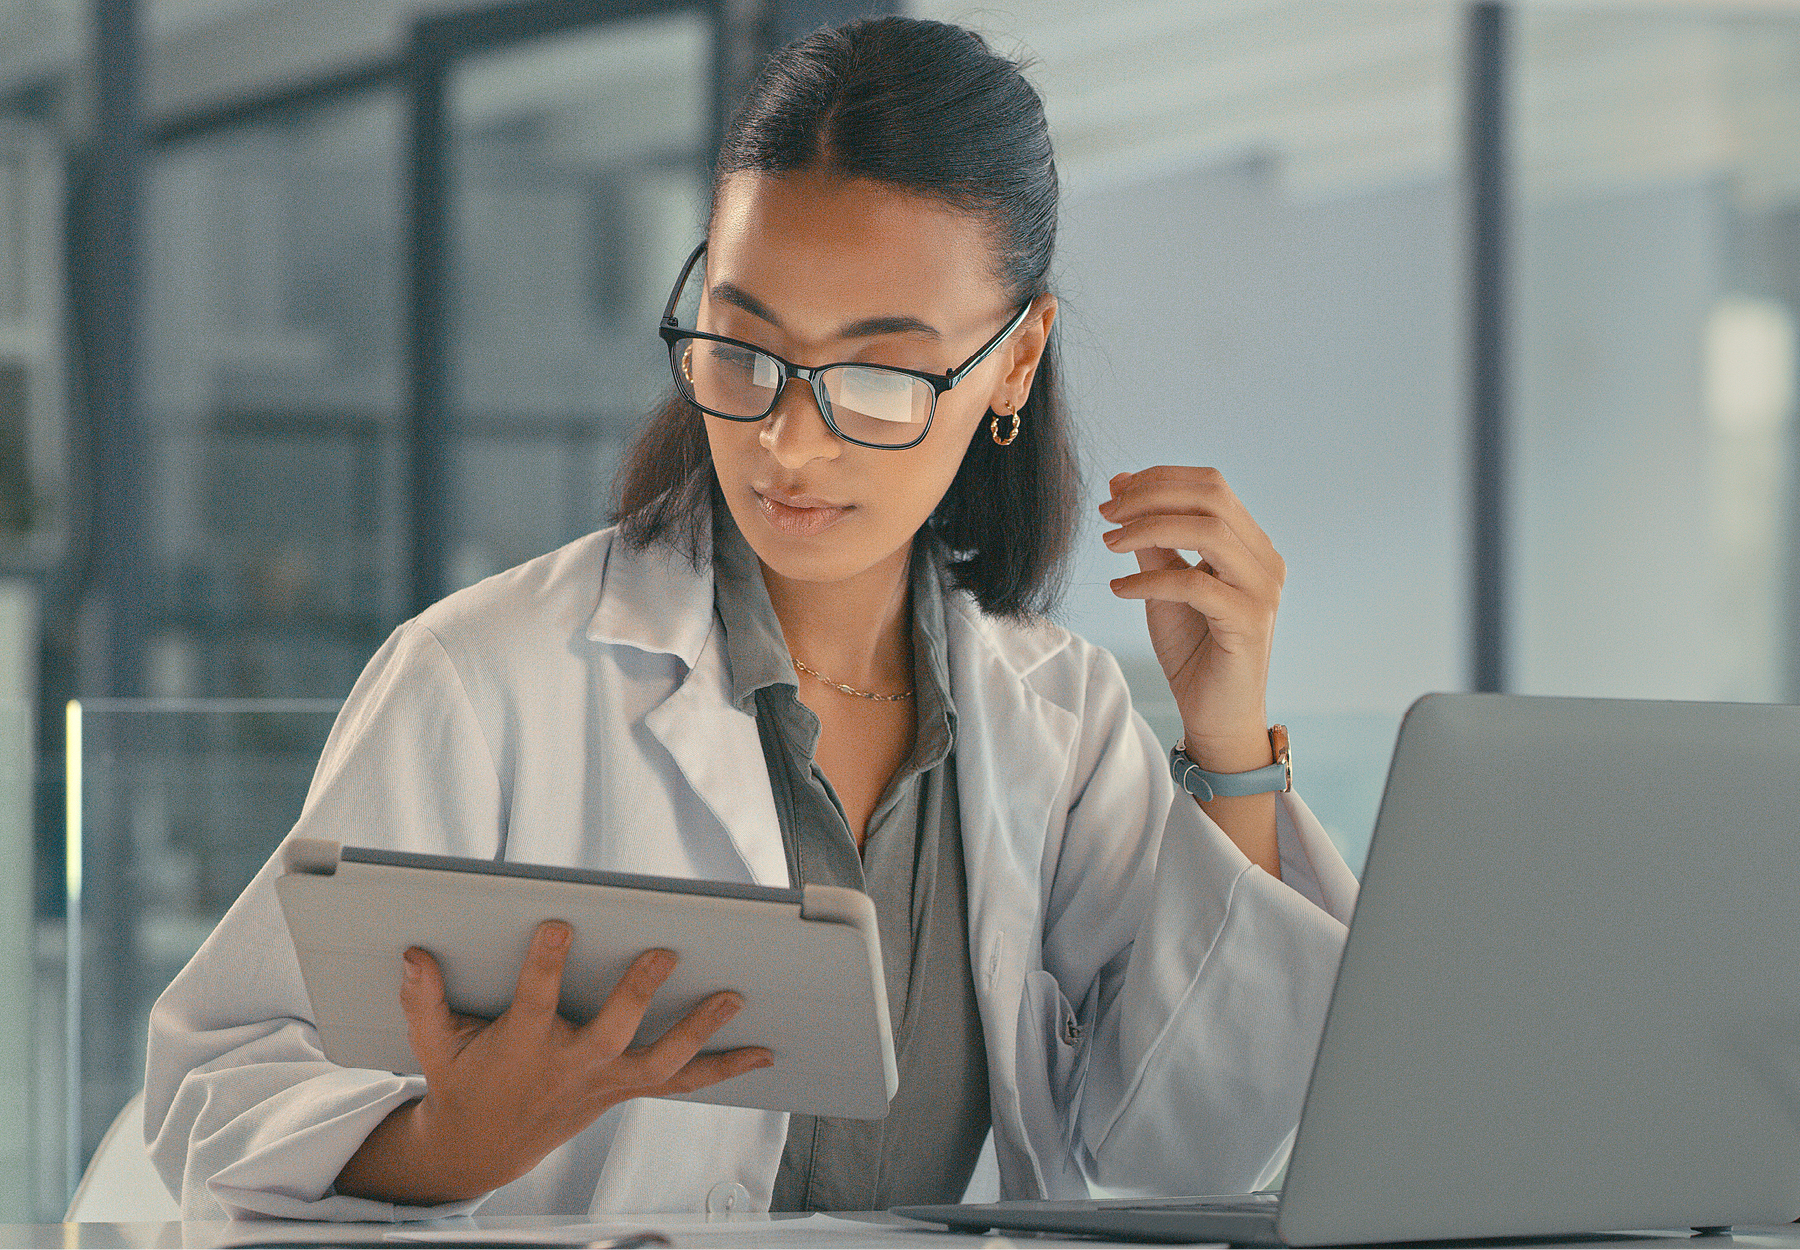 Female lab professional sits at her desk in her office looking at billing information on her tablet. iStock image.